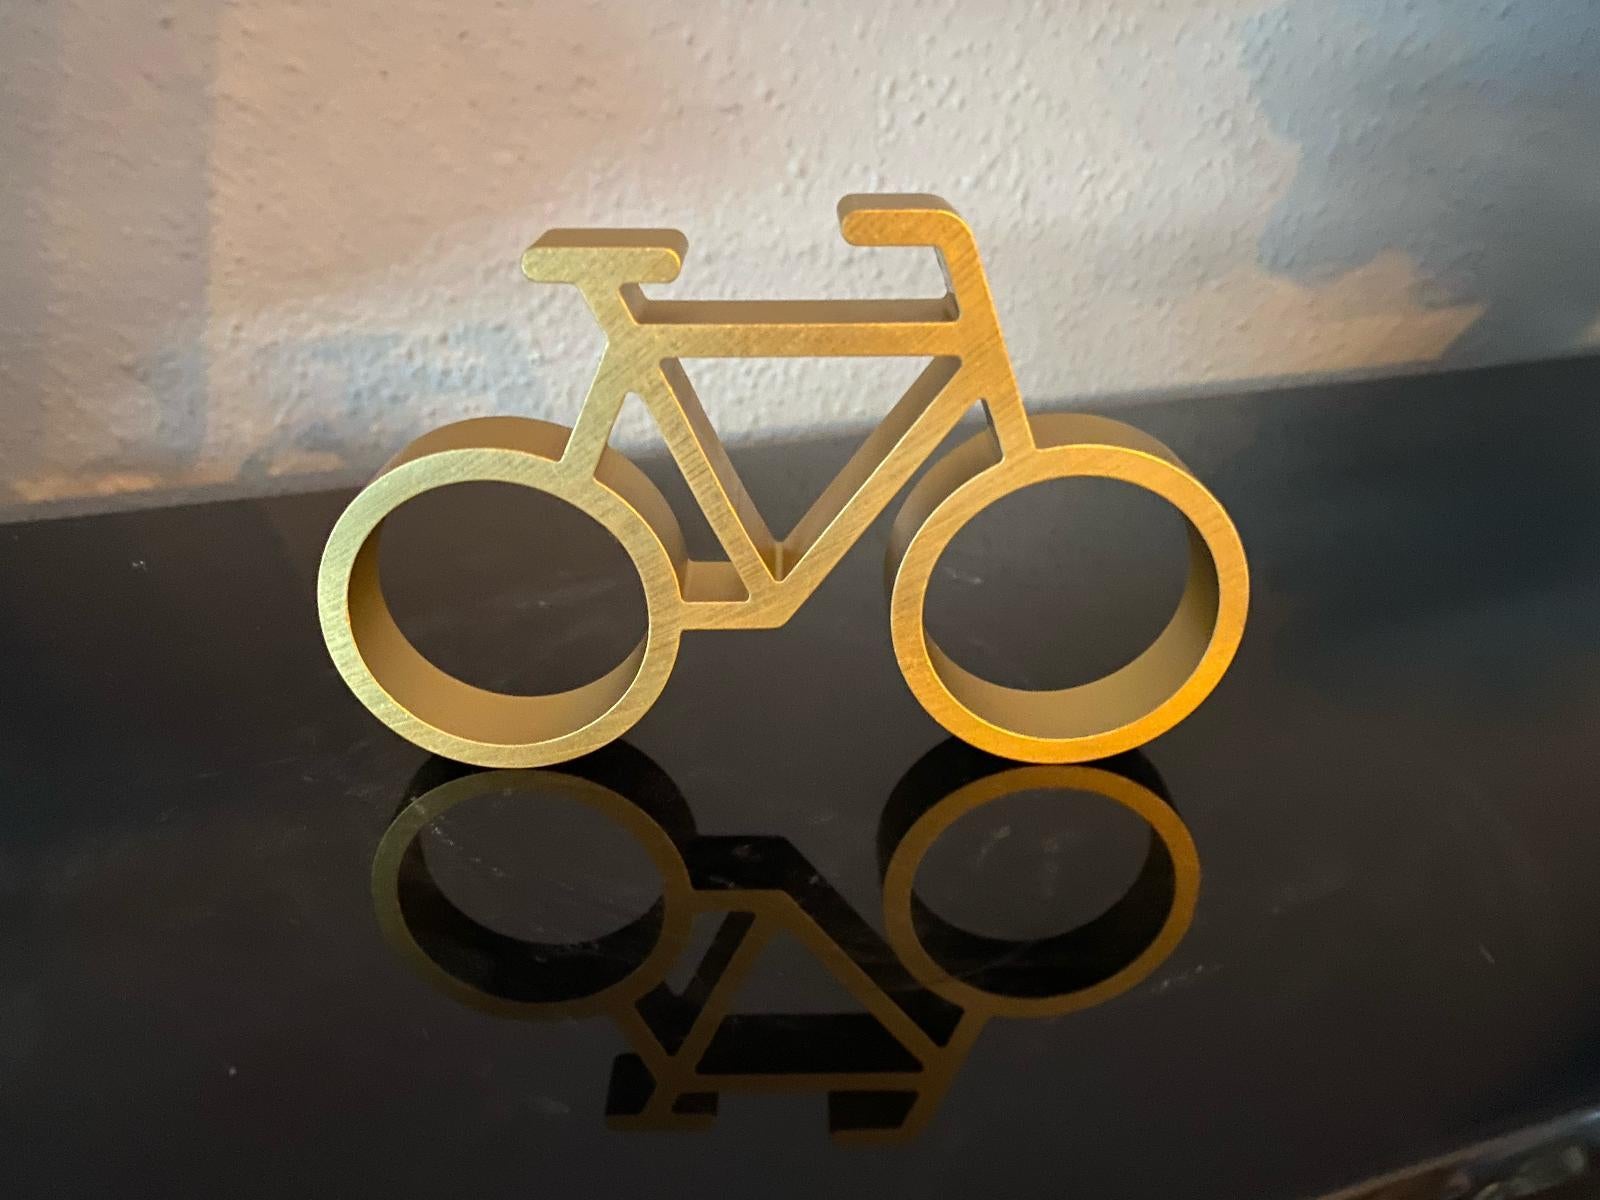 This small bicycle was designed by Marcel Wanders for Randstad Group. Randstad Group is big employment agency. Since 2018 Marcel Wanders designs a bicycle for this company, as a year-end gift. With this gift they support the World Bicycle Relief.